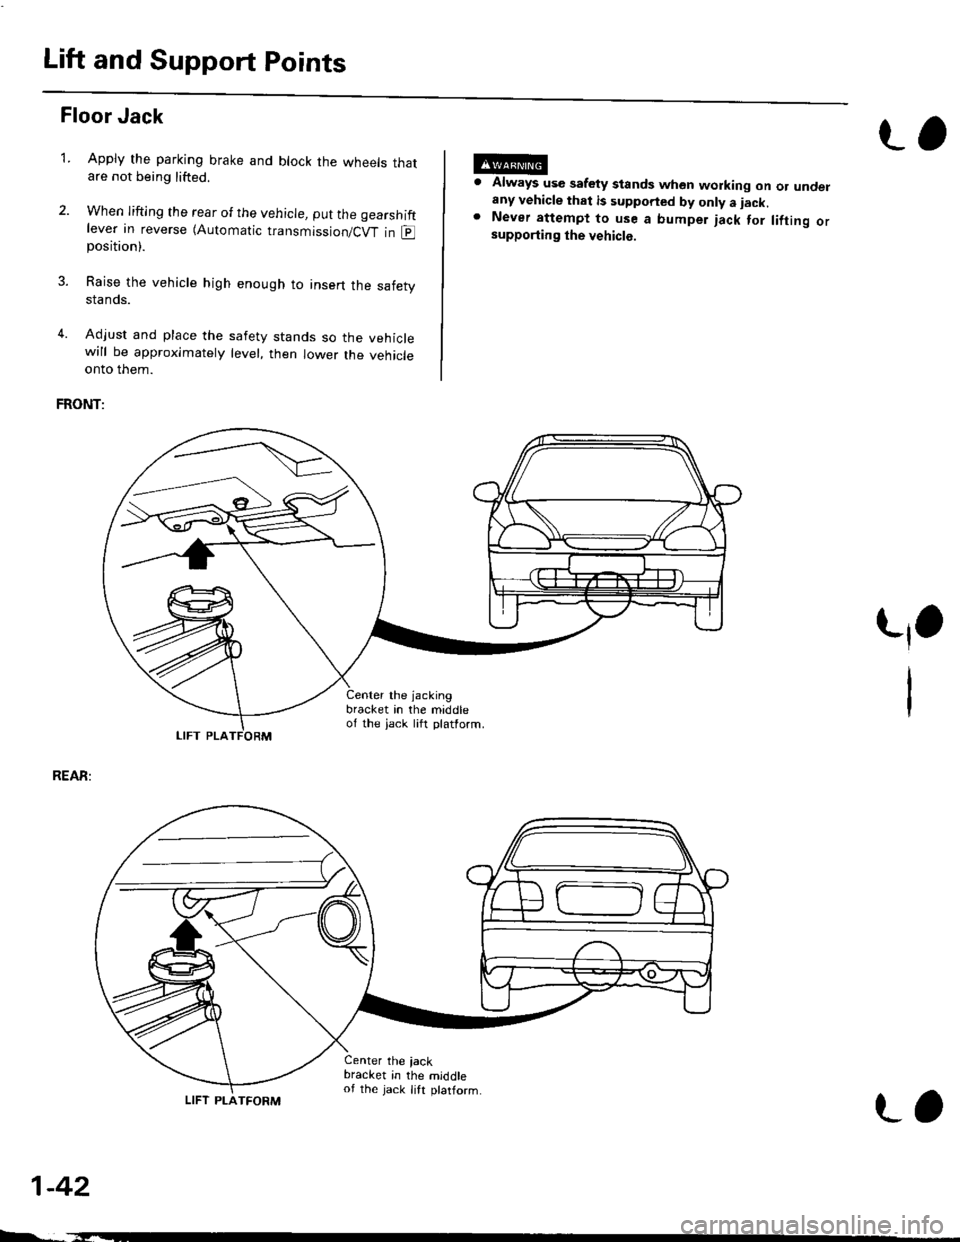 HONDA CIVIC 2000 6.G Service Manual Lift and Support Points
Floor Jack
Apply the parking brake and block the wheets thatare not being lifted.
When lifting the rear of the vehicle, put the gearshiftlever in reverse (Automatic transmissio